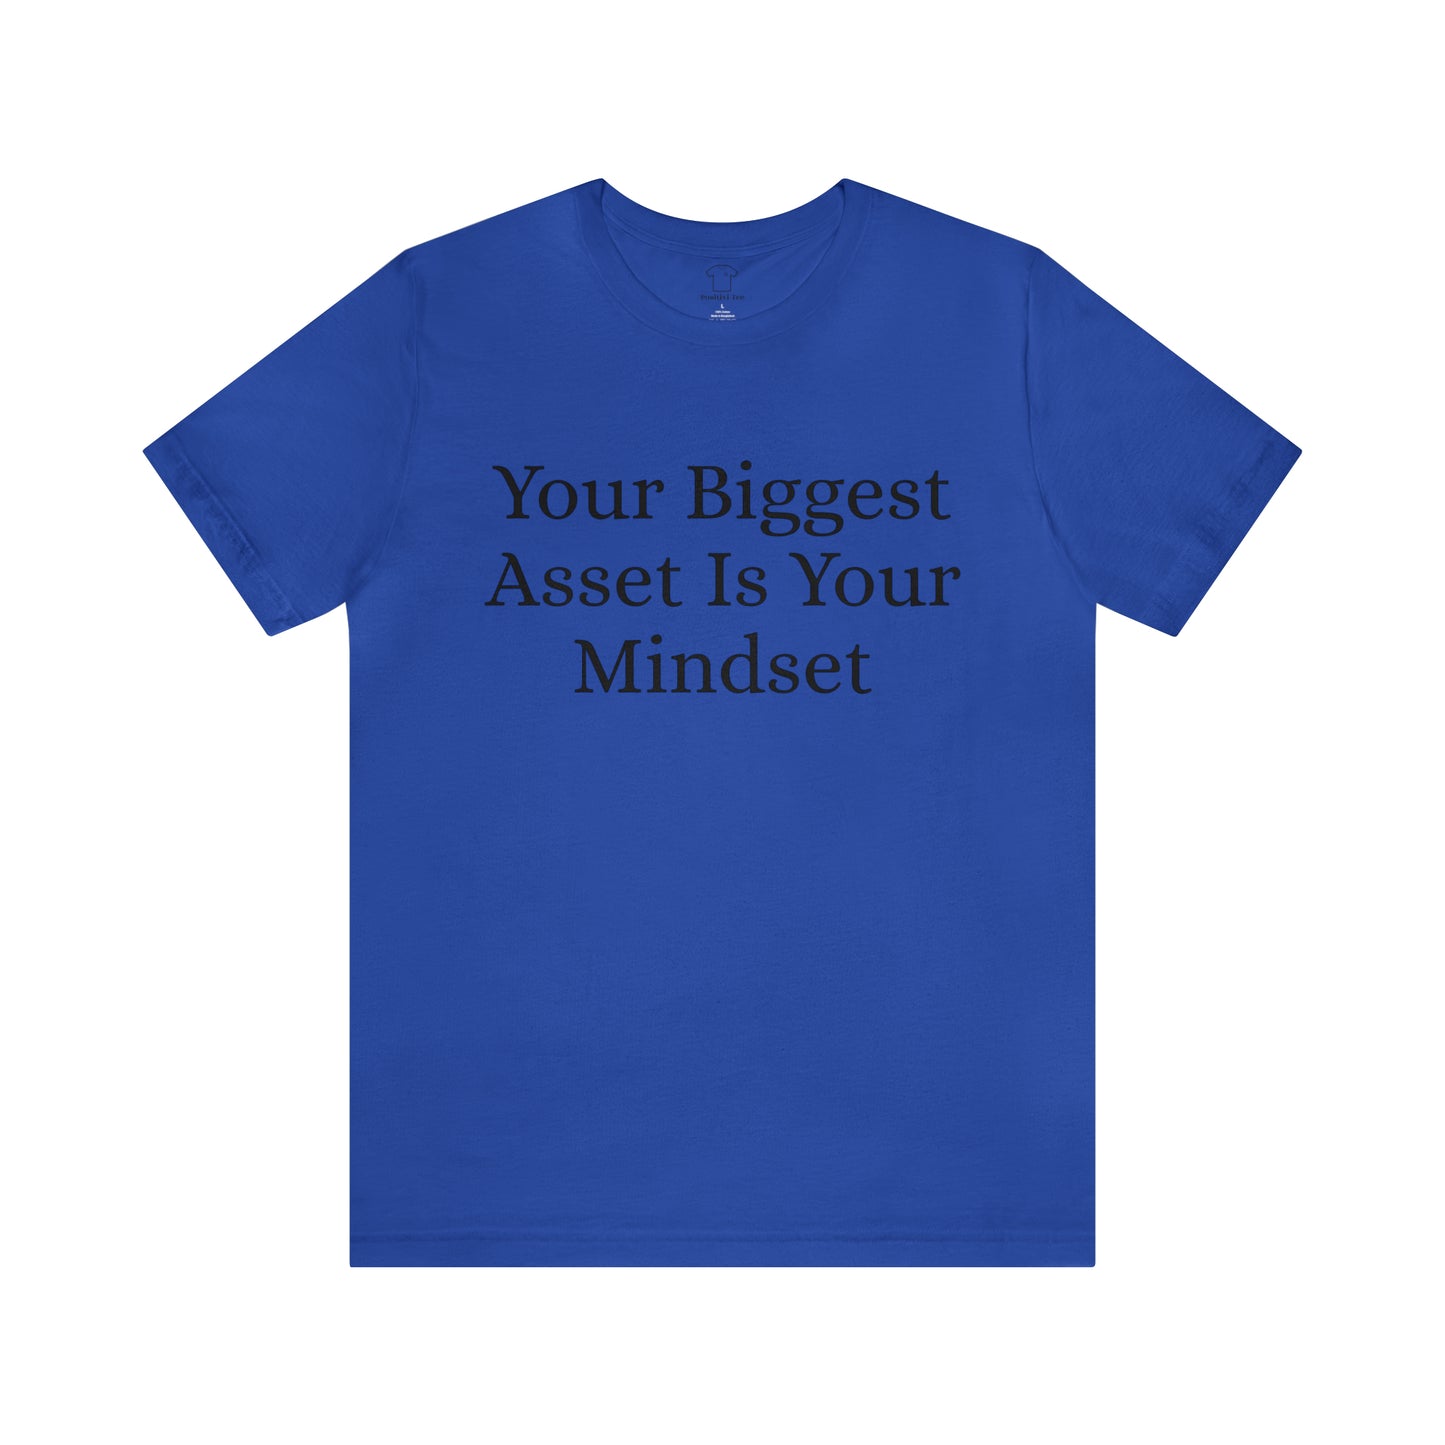 Your Biggest Asset Is Your Mindset